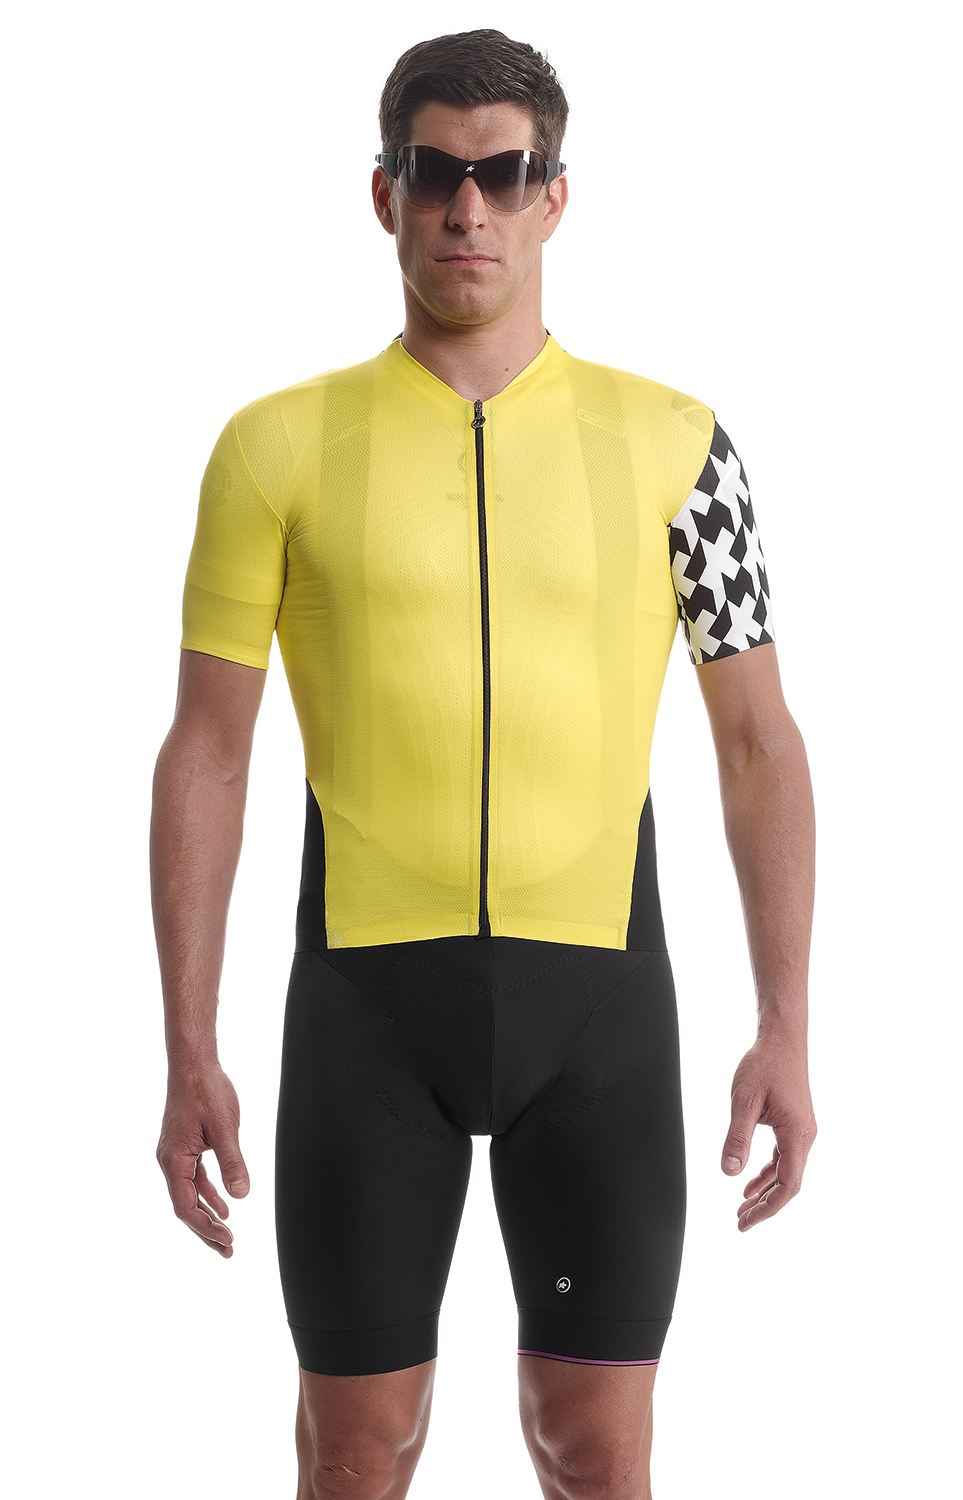 Assos SS.equipeJersey_evo8 | R&A Cycles